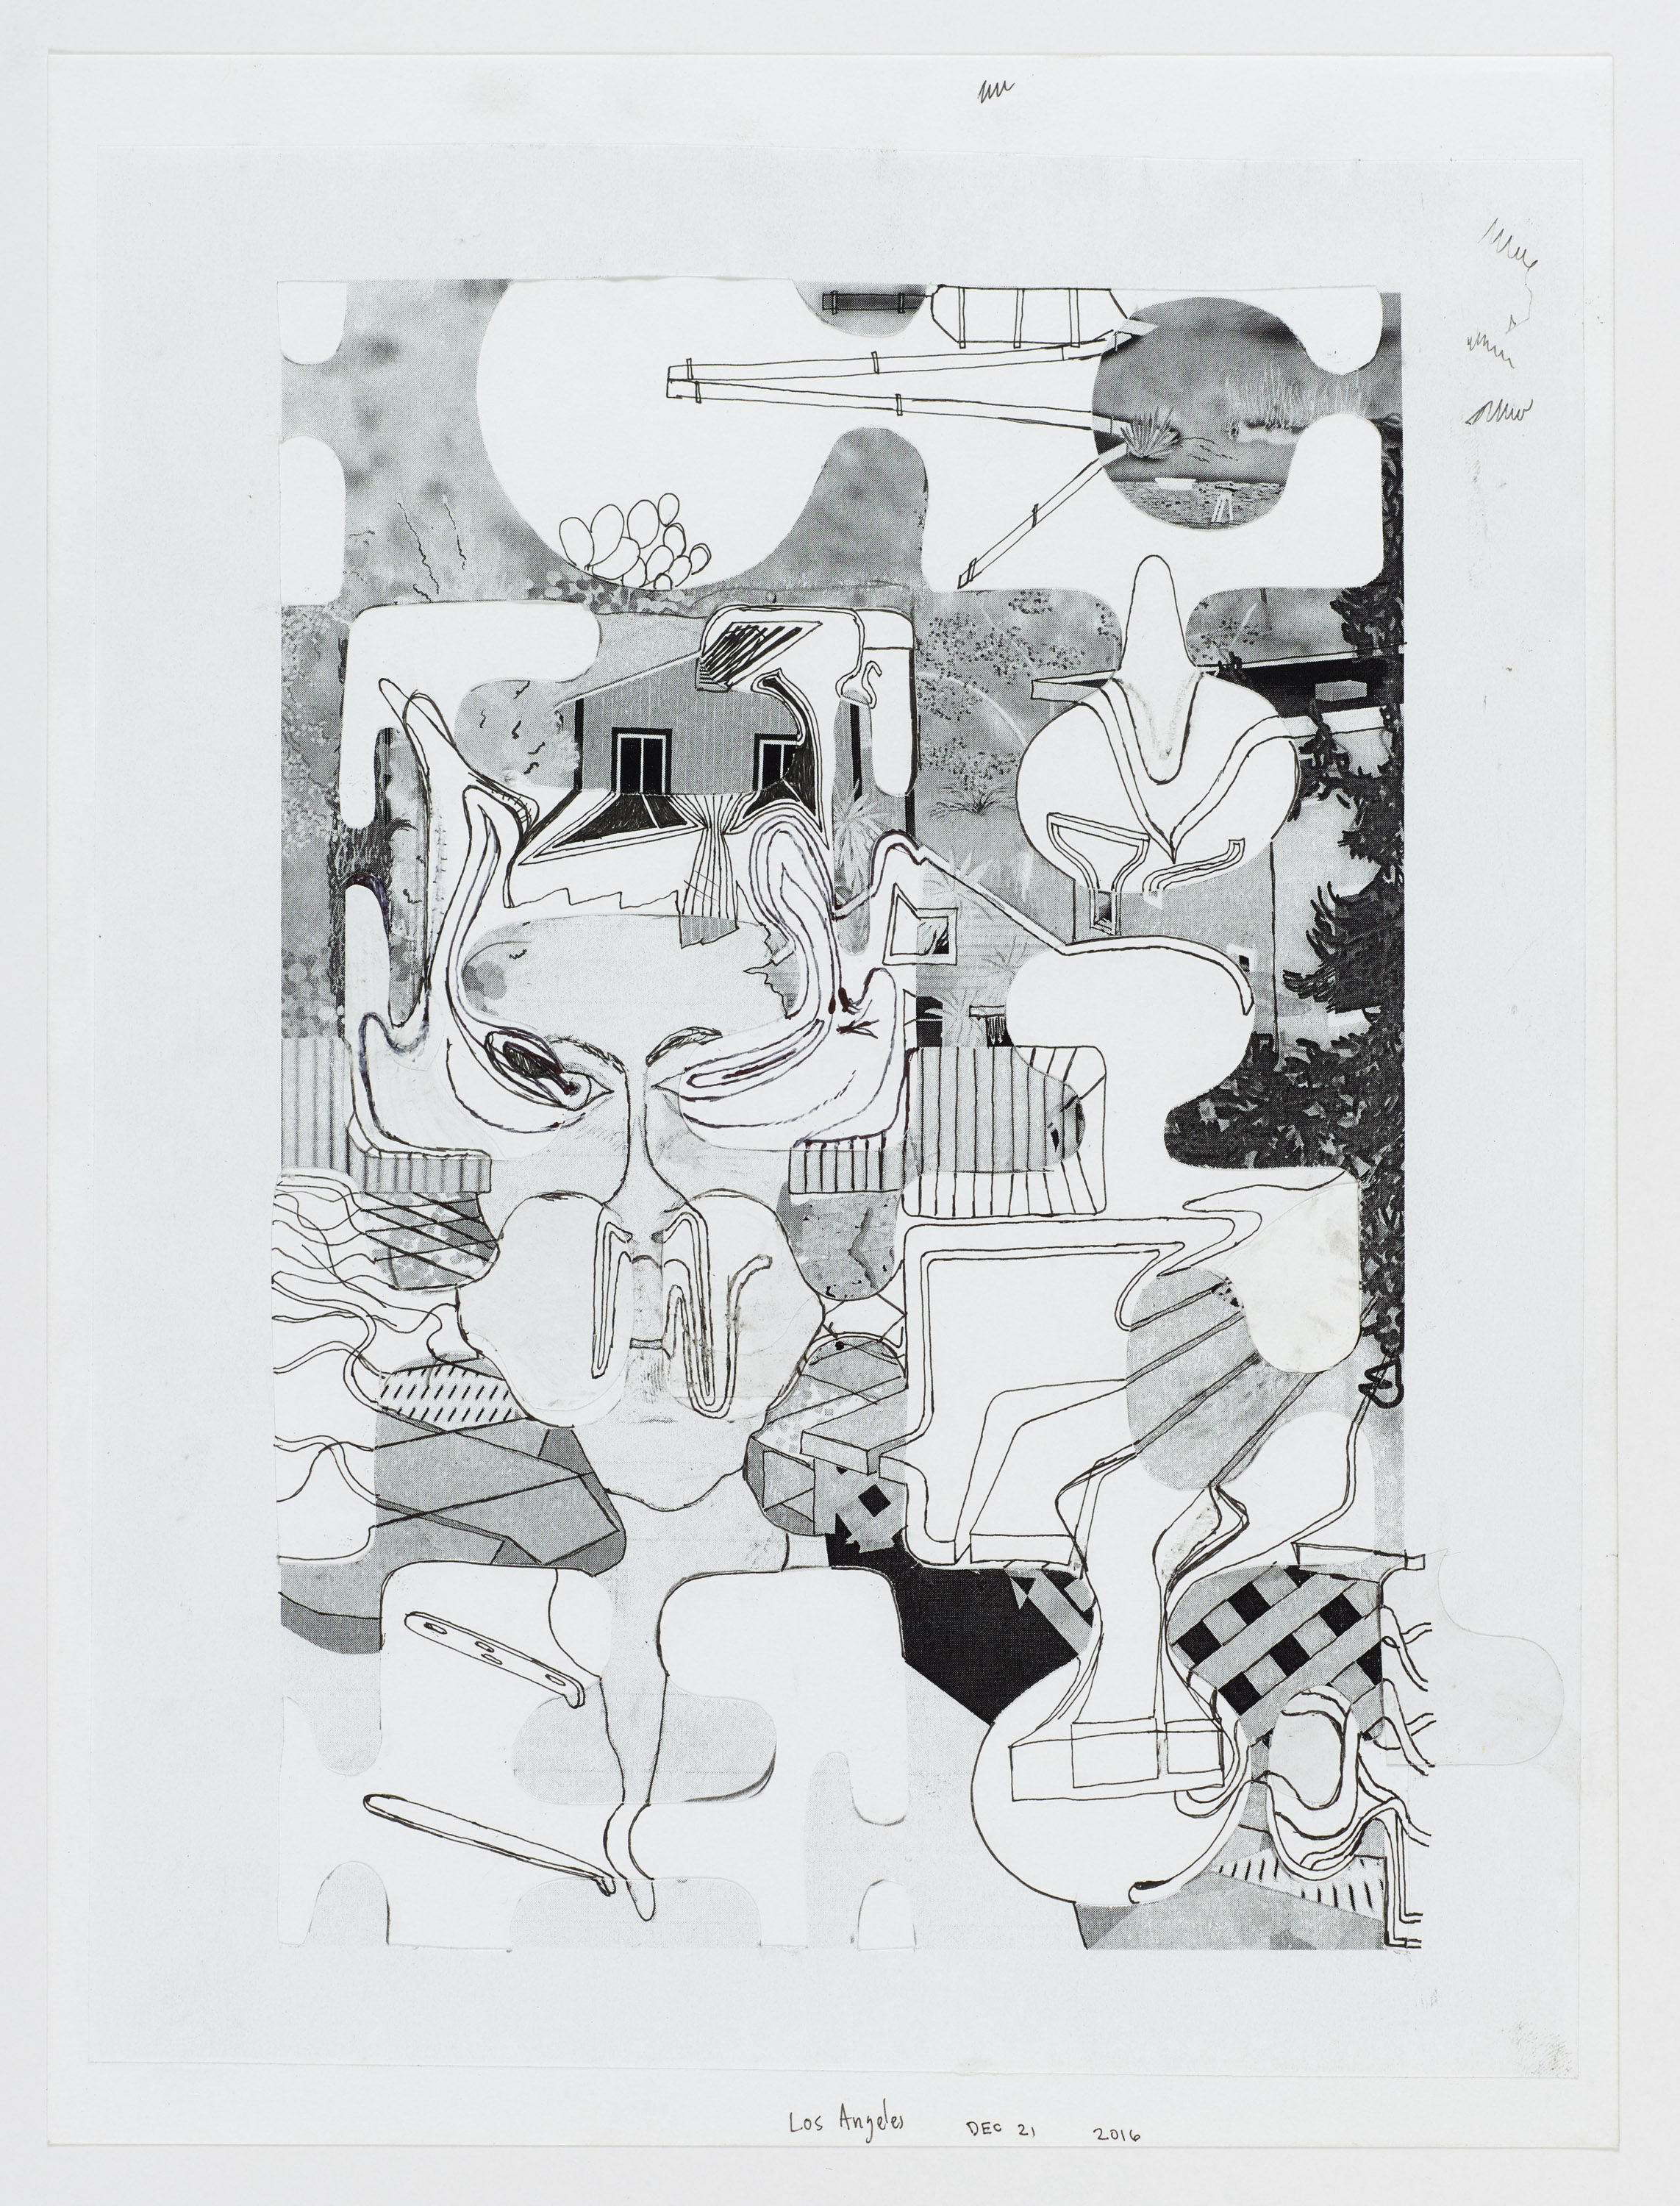 Michael Williams, “untitled puzzle drawing,” 2016, ink and photocopy collage on paper, 12 x 9 in., Courtesy of the artist; CANADA, New York; Gladstone Gallery, New York and Brussels; and Galerie Eva Presenhuber, Zurich, © Michael Williams